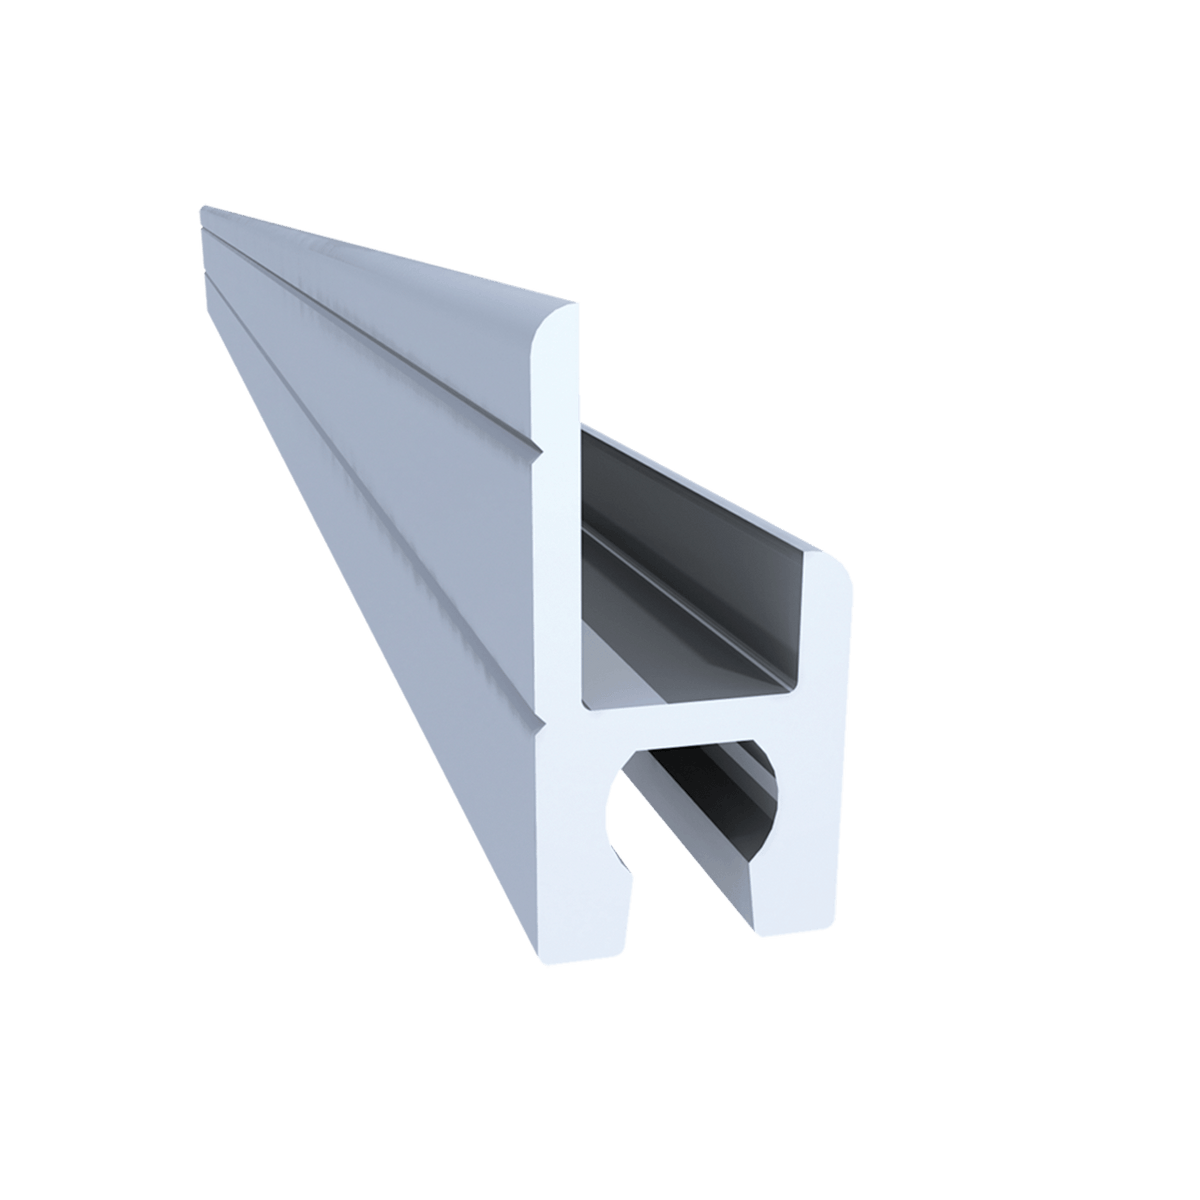 1/4" Aluminum Wide Slot for Water Resistant Seal, 10 EACH Length